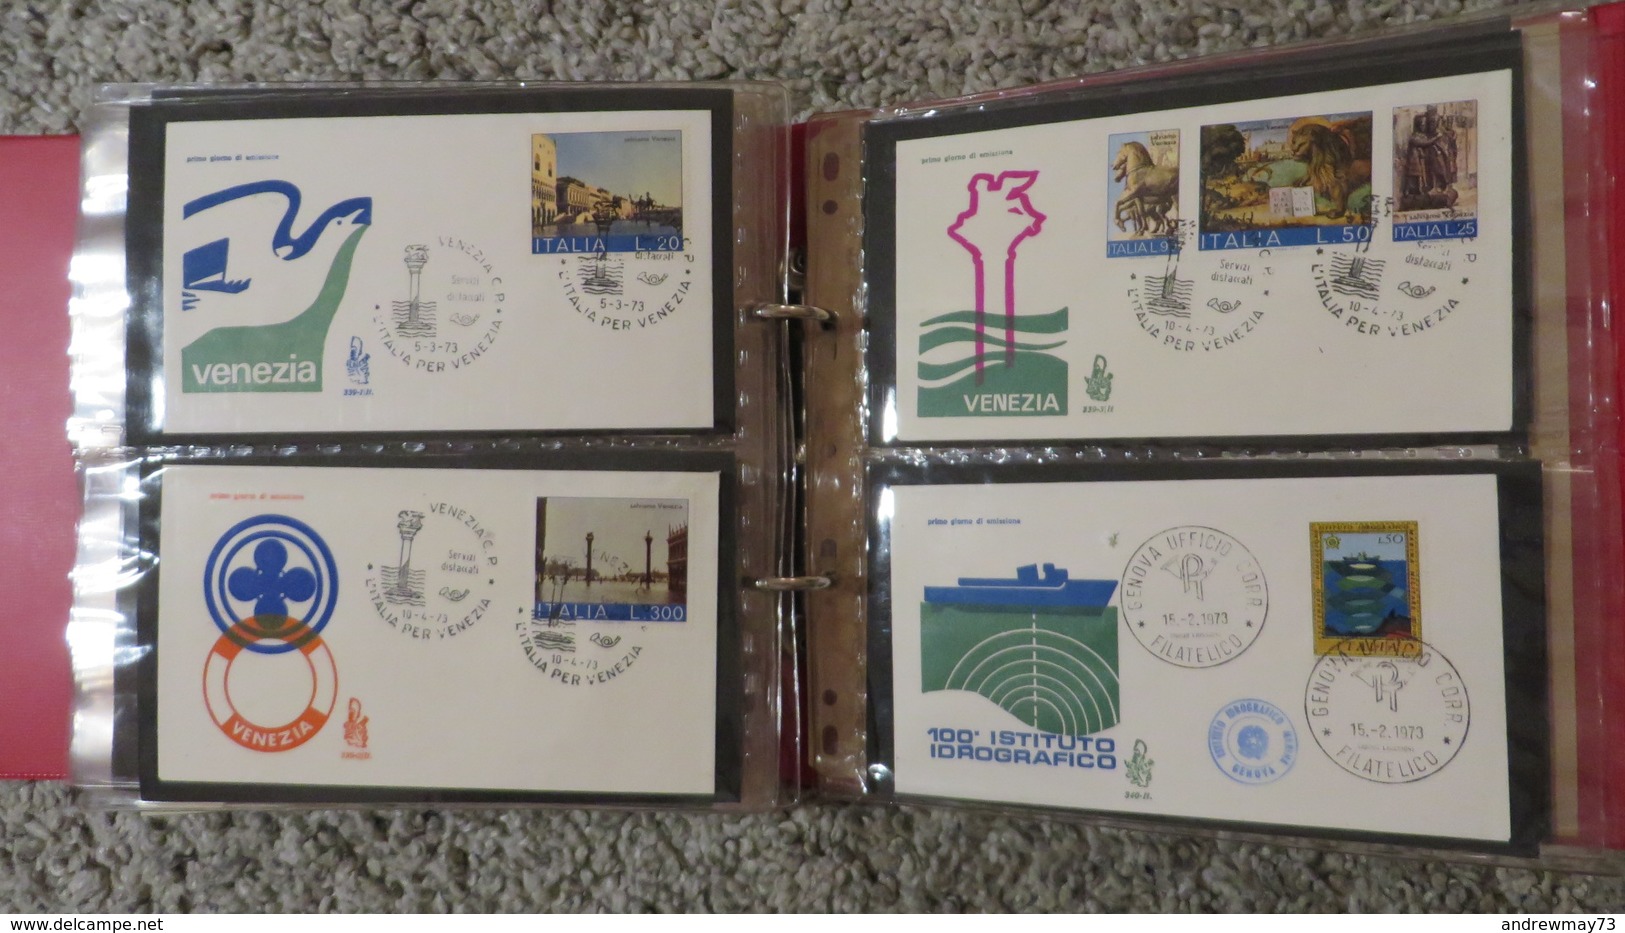 FDC COLLECTION- 8 BOOKS 615 FDC (480 FROM ITALY)